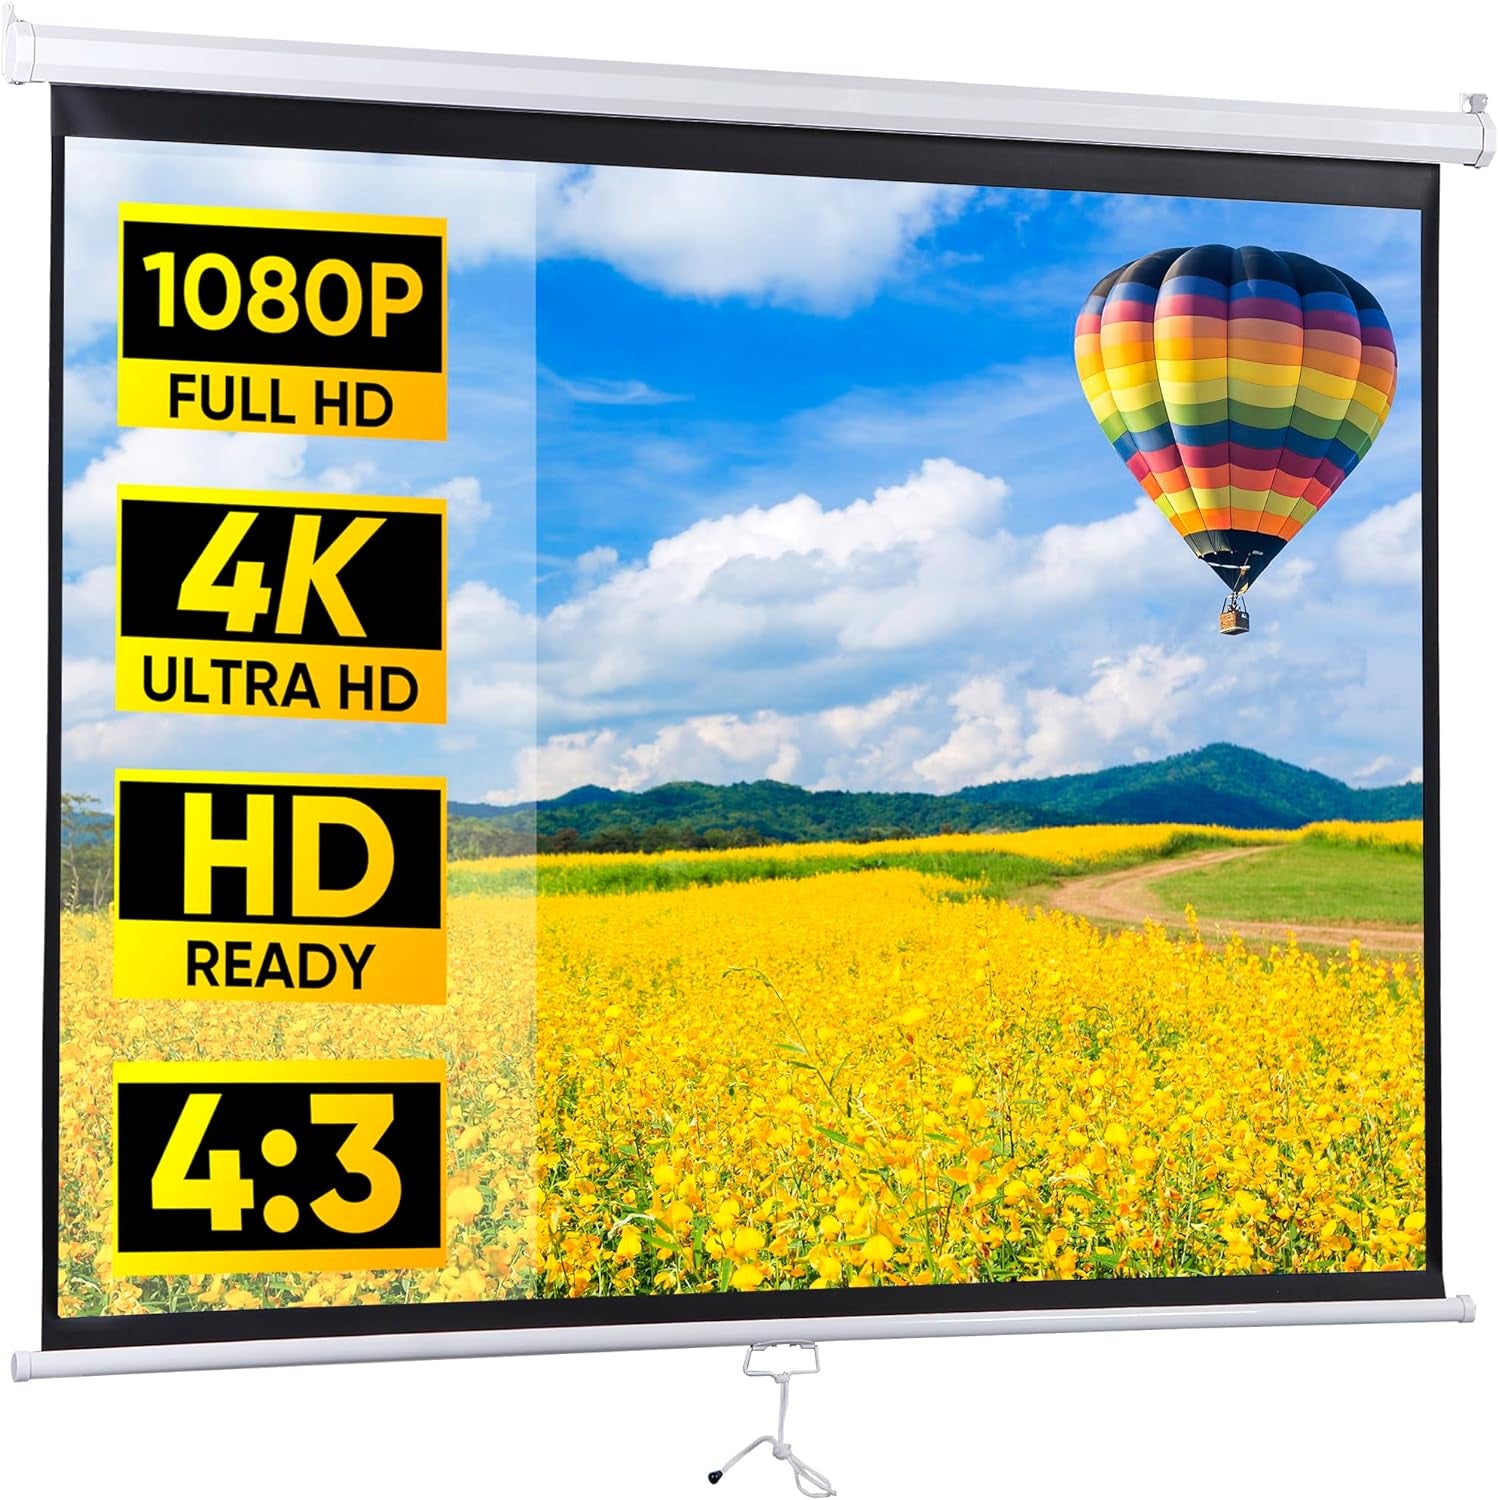 Portable Projector Screen Pull Down, 72 Inch 4:3 Video Projection Screen Home Theater, Retractable Projector Screen White, Indoor Outdoor Moive Screen, Wall/Ceiling Mount (72'' 4:3)